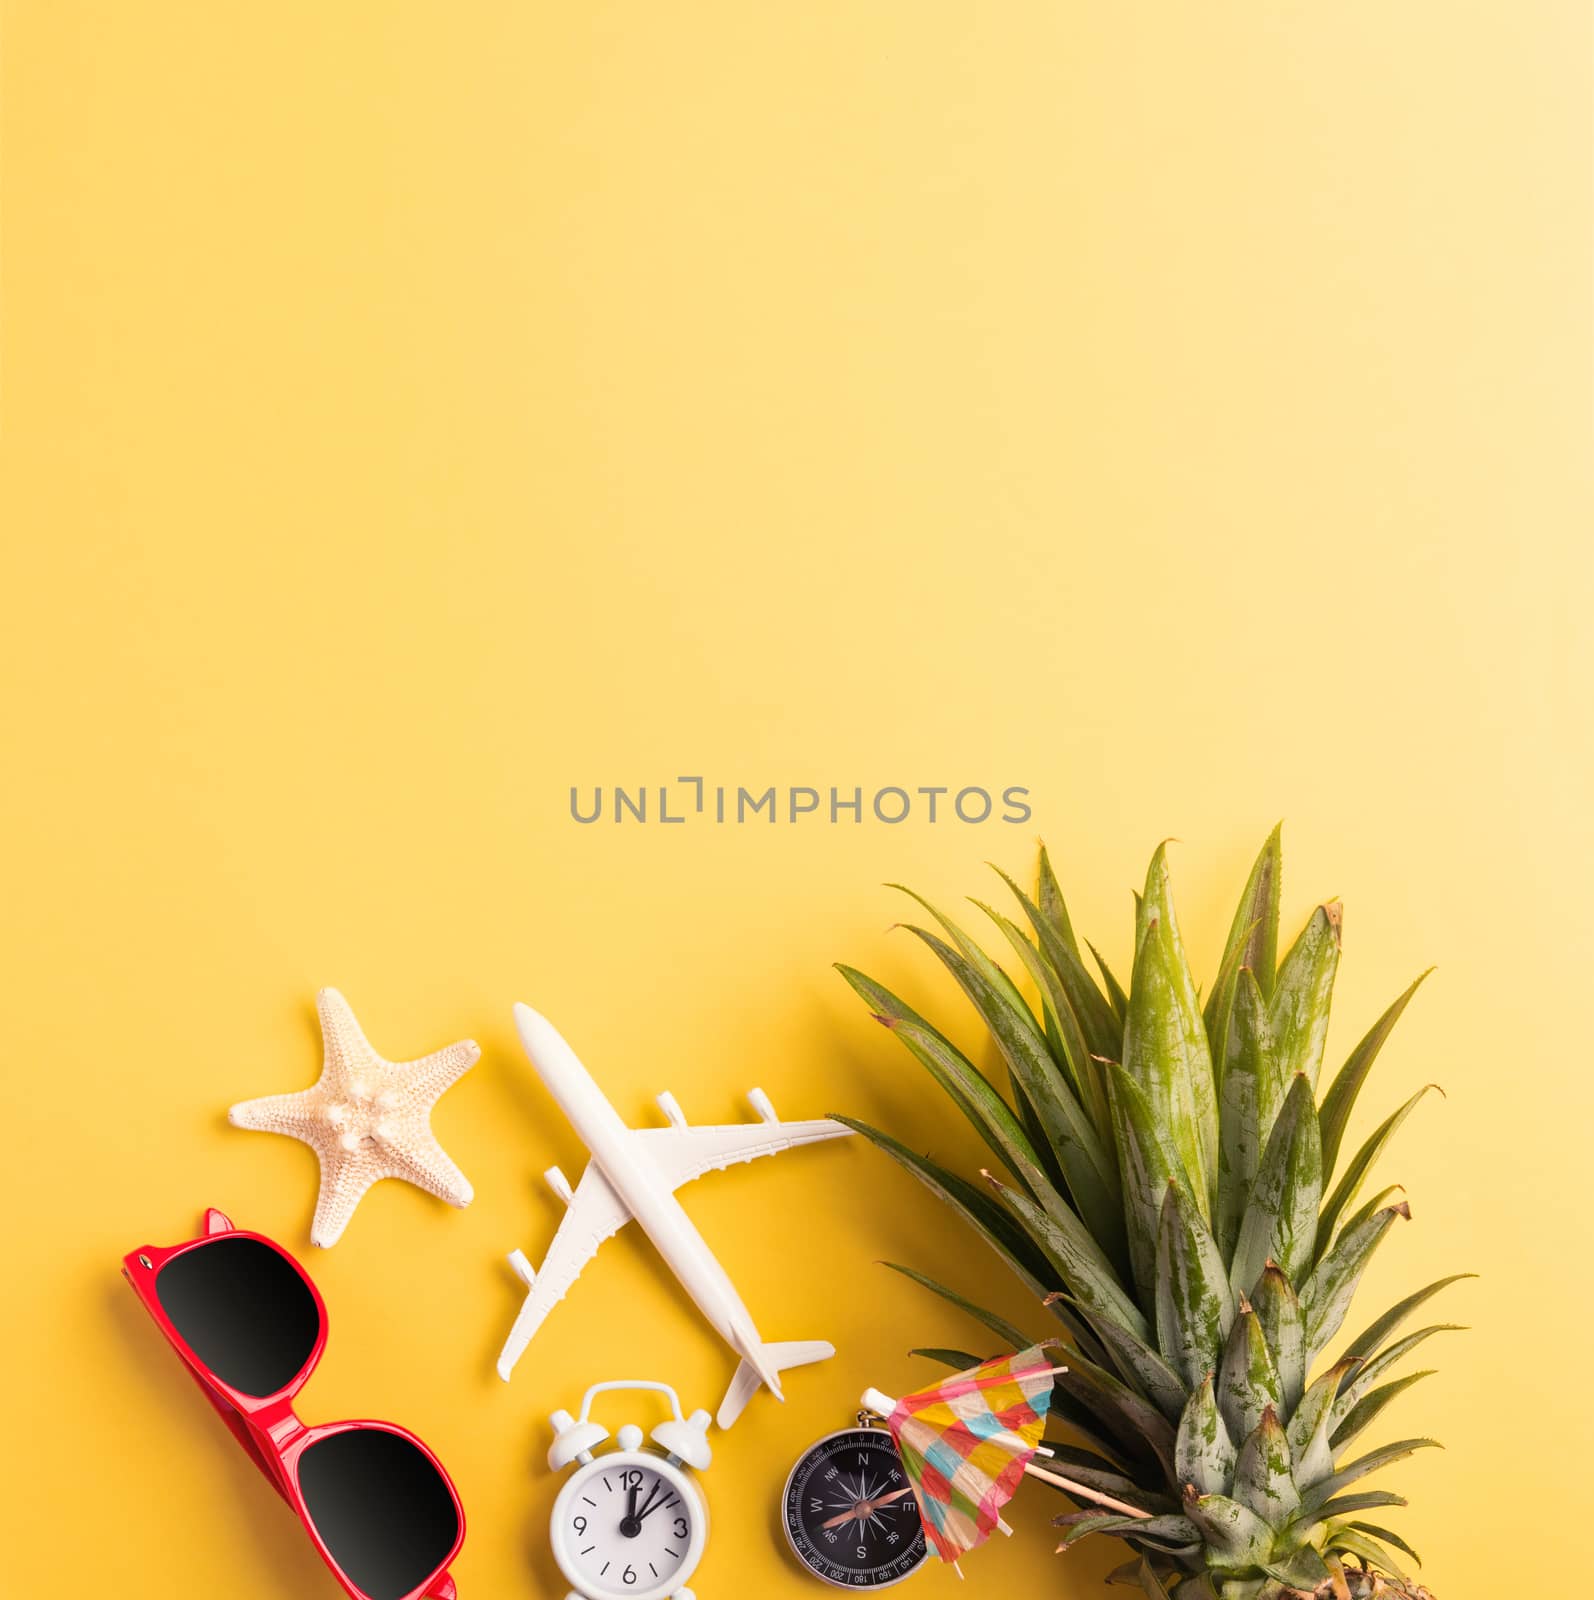 Celebrate Summer Pineapple Day Concept, Top view flat lay of funny pineapple, sunglasses, model plane, starfish and clock alarm isolated on yellow background, Holiday summertime in tropical